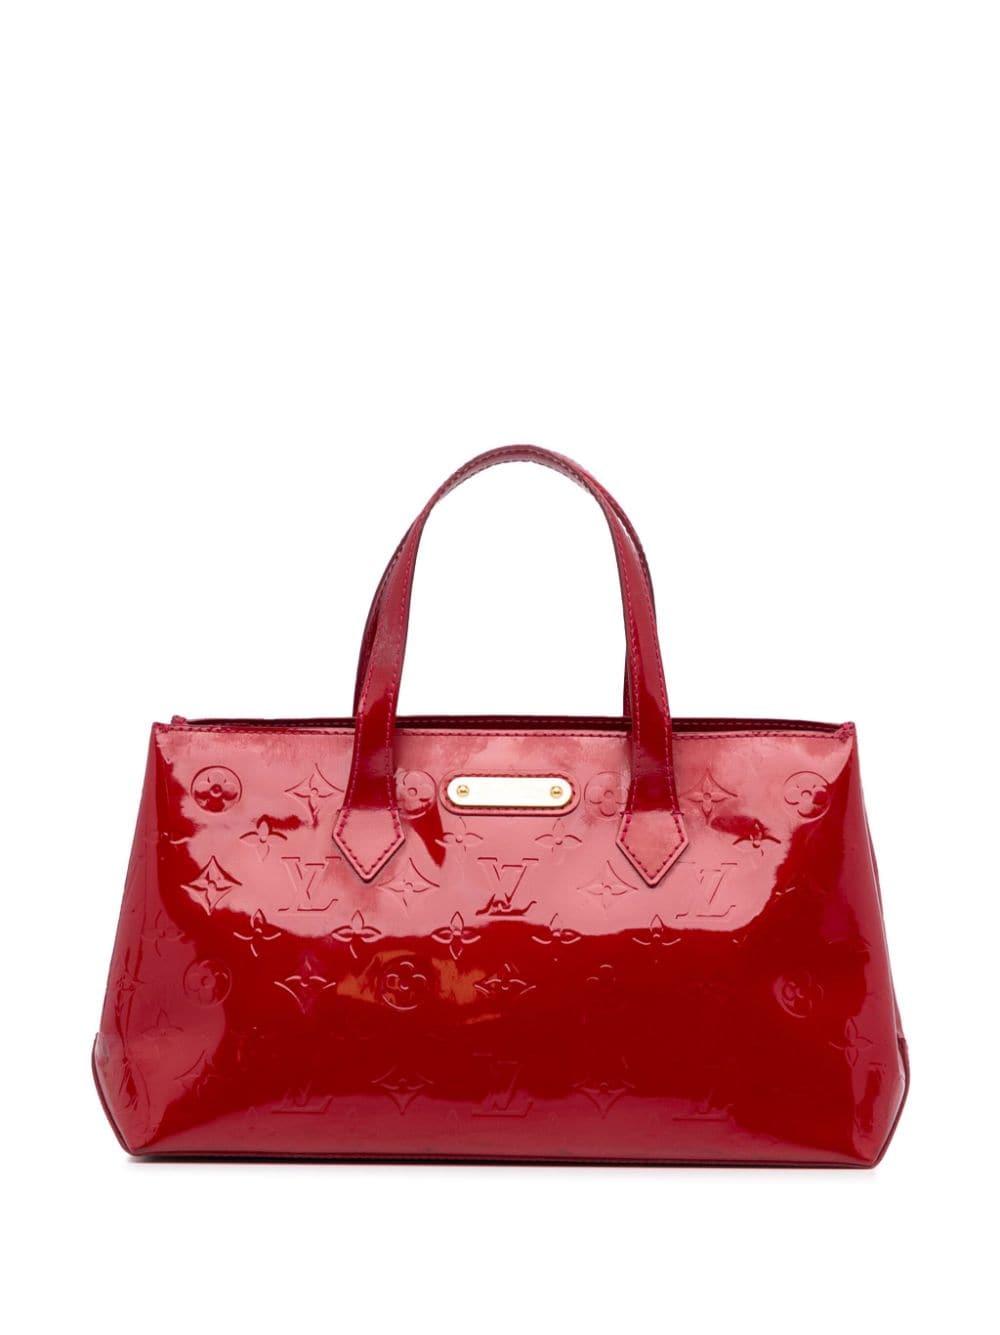 Pre-owned Louis Vuitton 2010  Monogram Vernis Wilshire Pm In Red